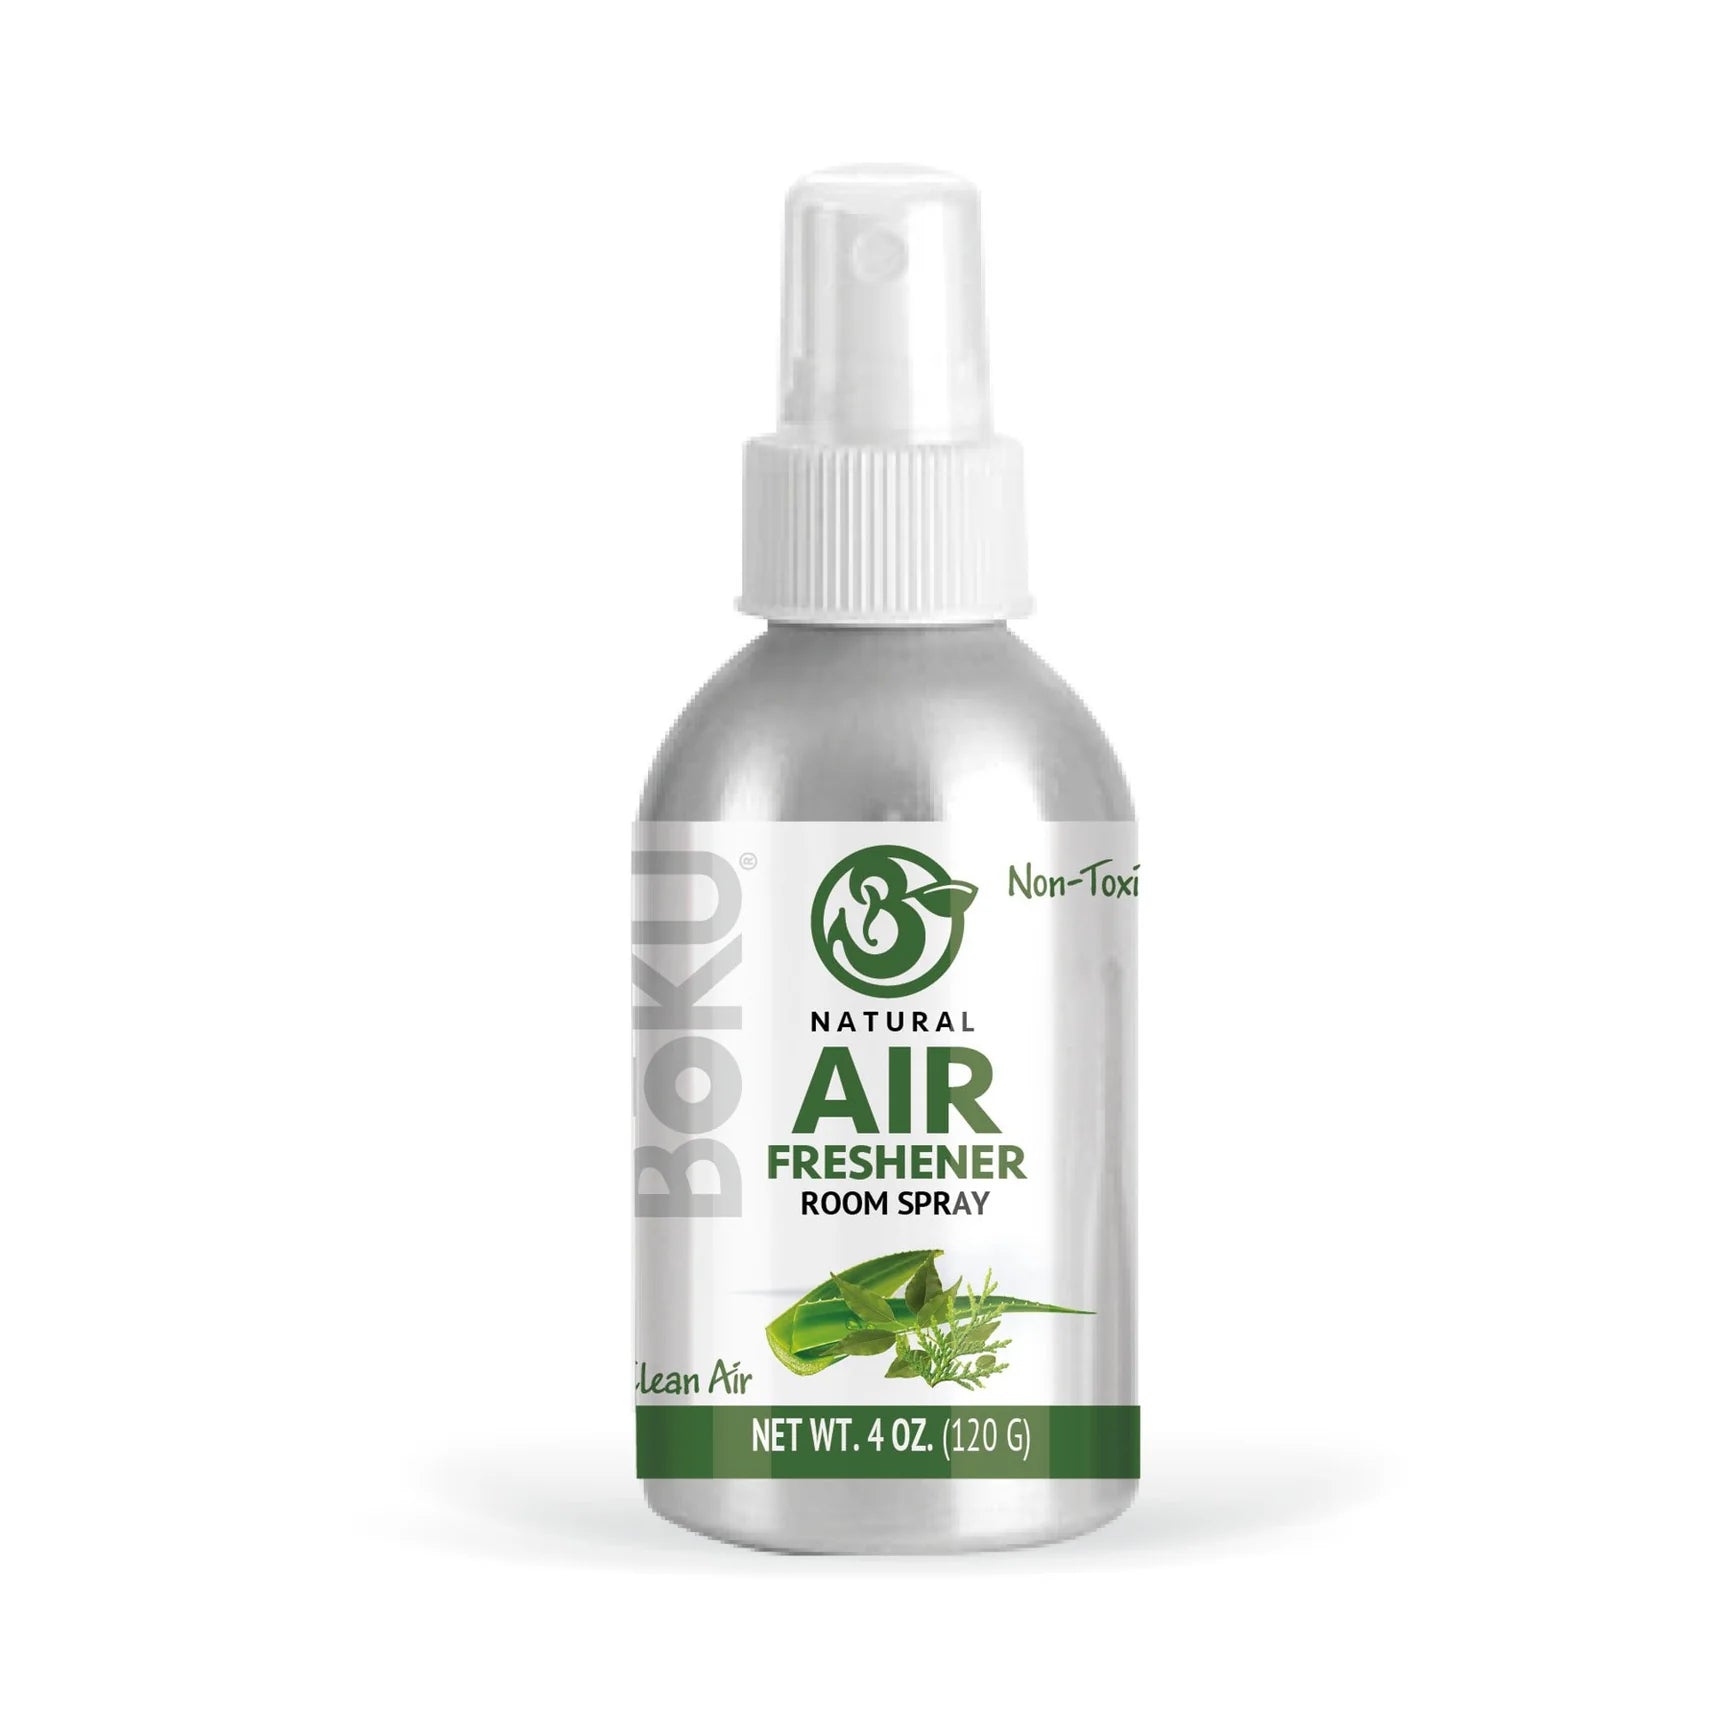 Breathe Fresh AIR: A Natural Alternative To Toxic Household Disinfectants and Deodorizers